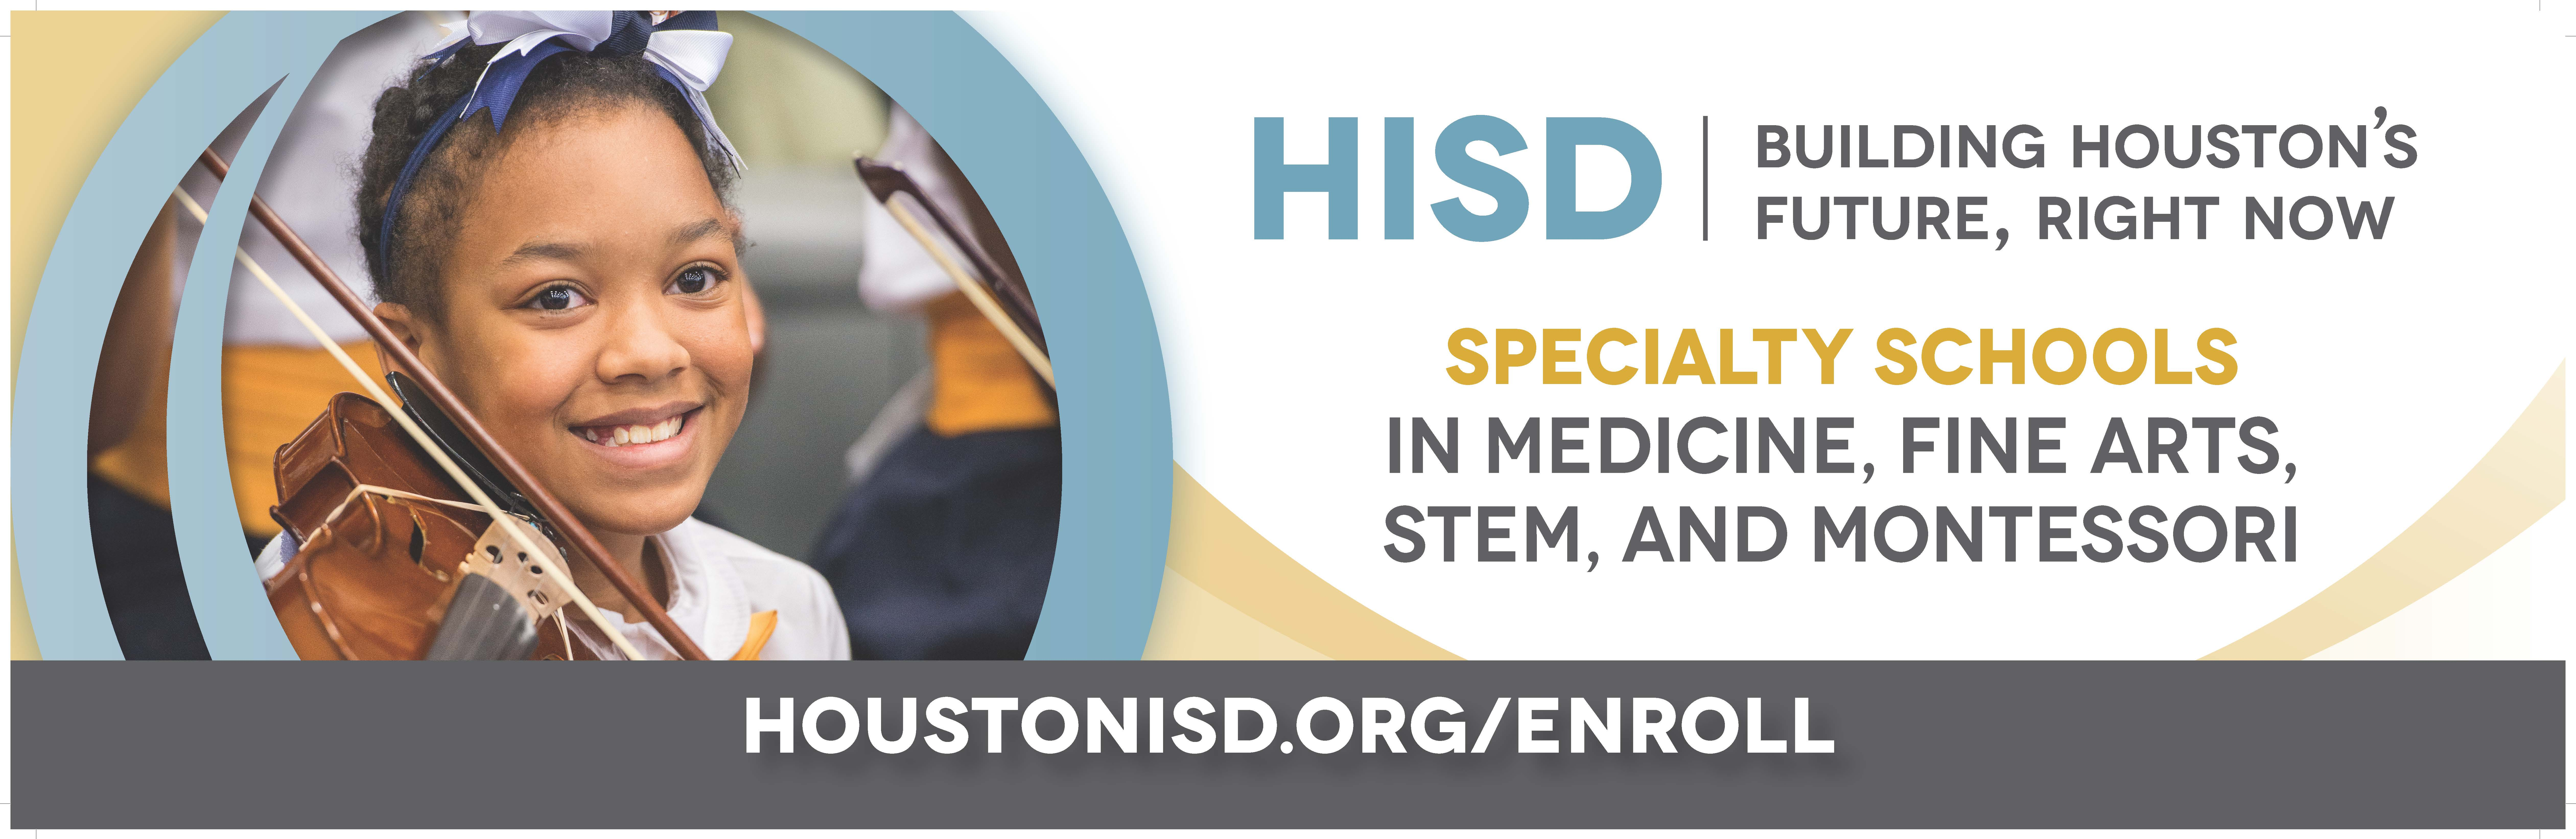 HISD Logo - HISD launches new logo and tagline across the city